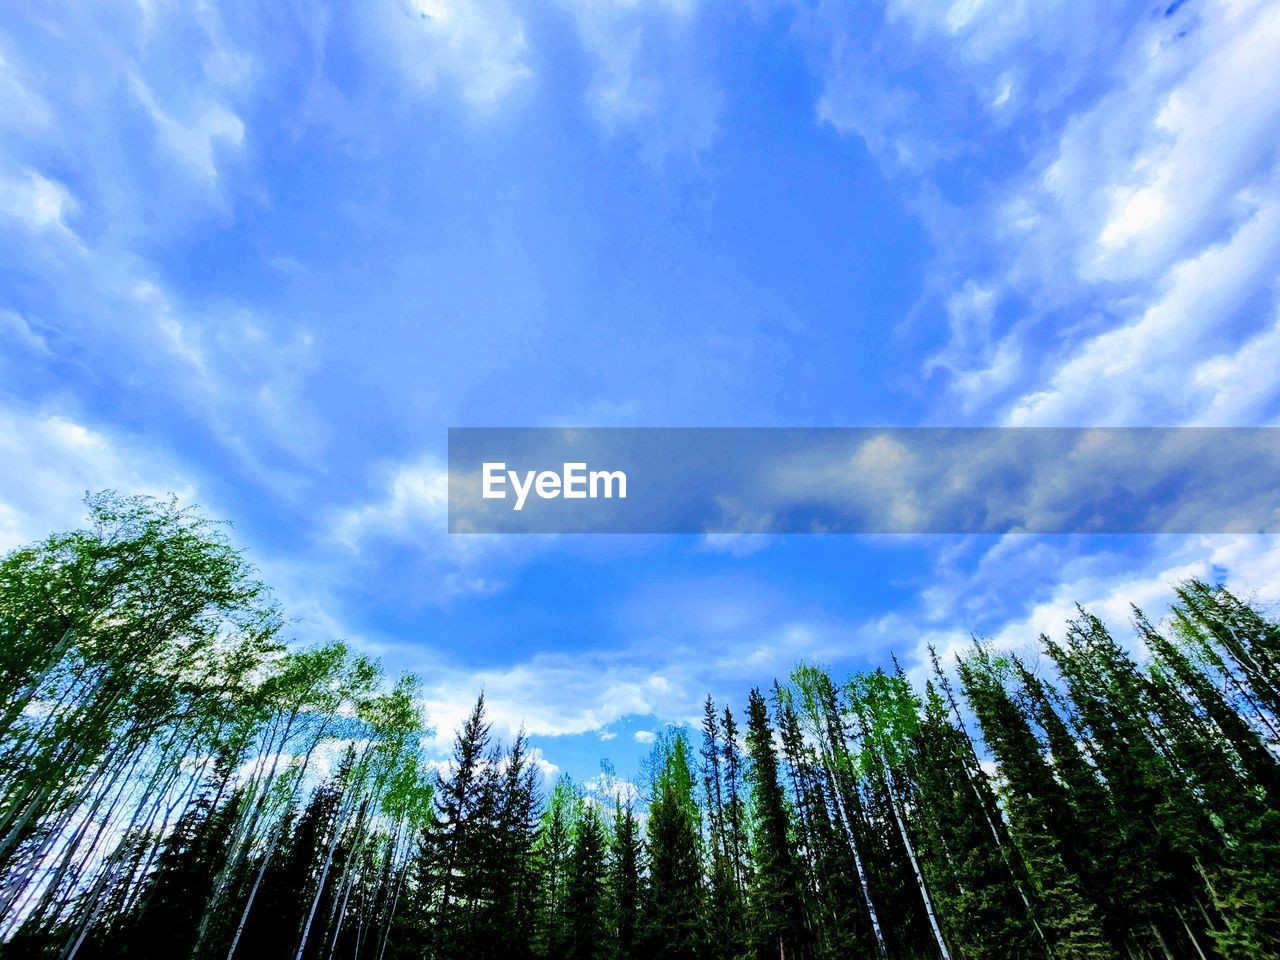 sky, tree, plant, cloud, nature, beauty in nature, sunlight, forest, scenics - nature, pine tree, low angle view, coniferous tree, no people, pinaceae, growth, tranquility, grass, environment, pine woodland, land, green, blue, tranquil scene, non-urban scene, woodland, landscape, outdoors, reflection, day, mountain, idyllic